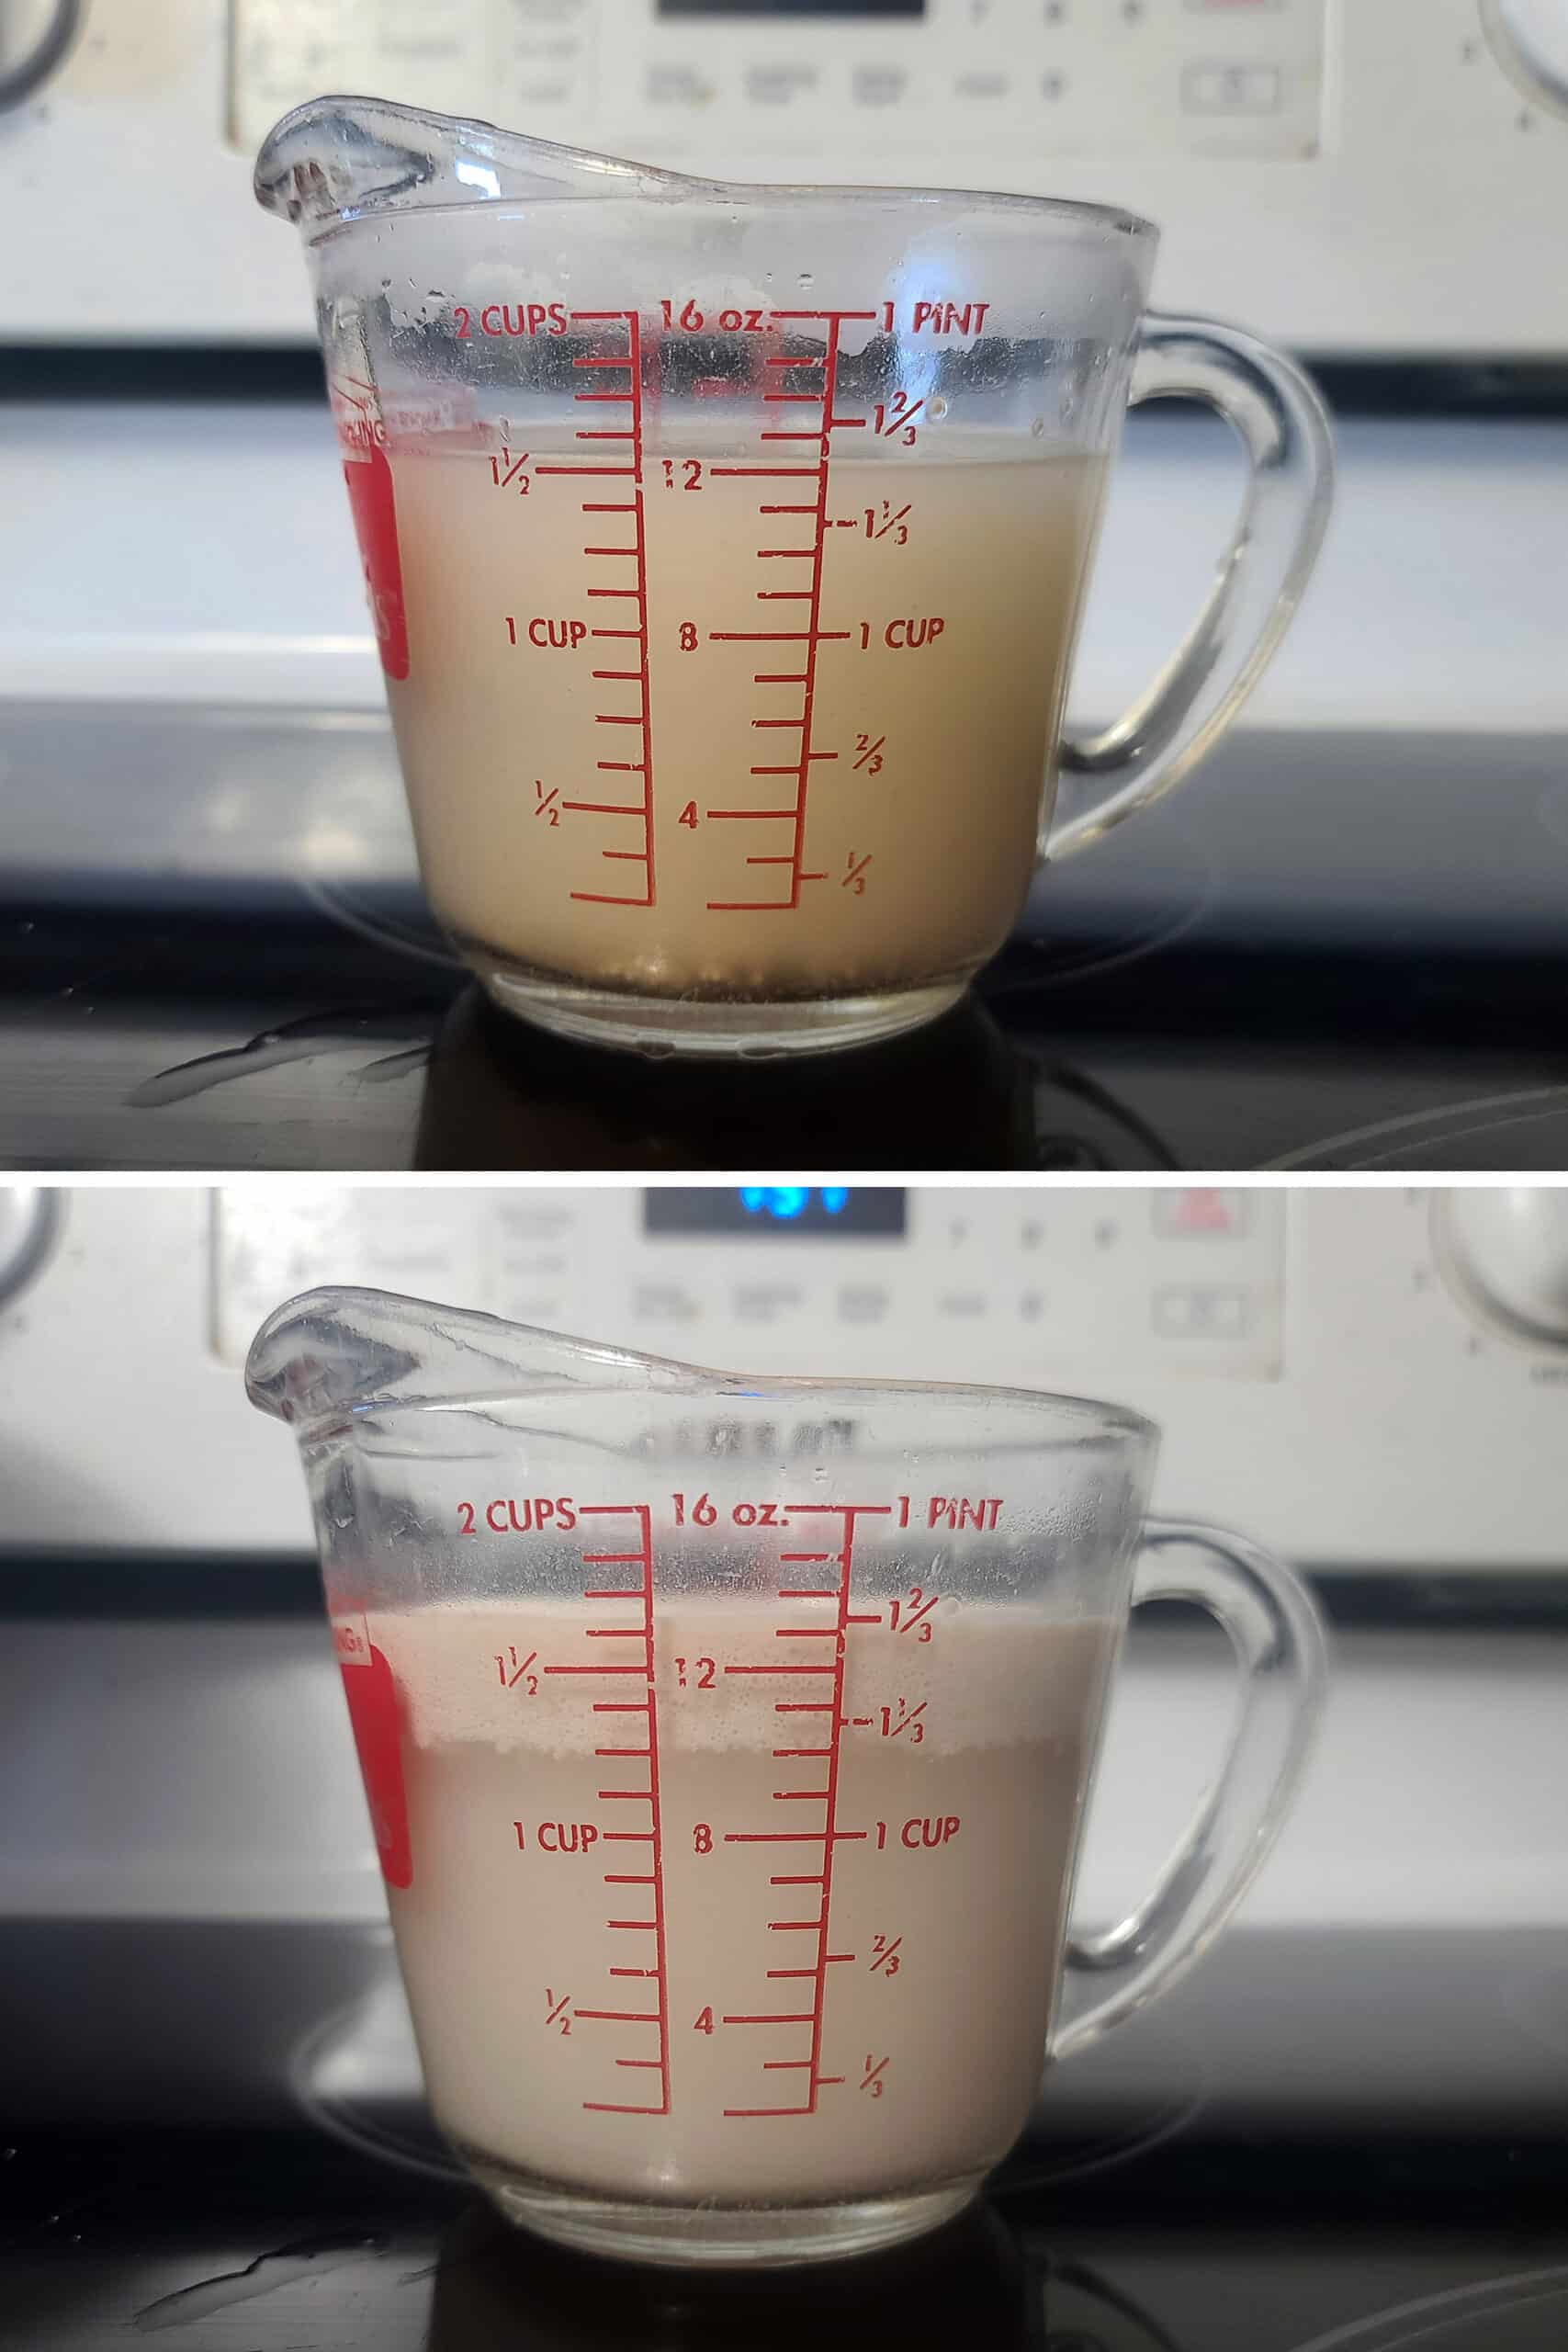 A 2 part image showing a measuring glass of water and yeast, before and after foaming up.